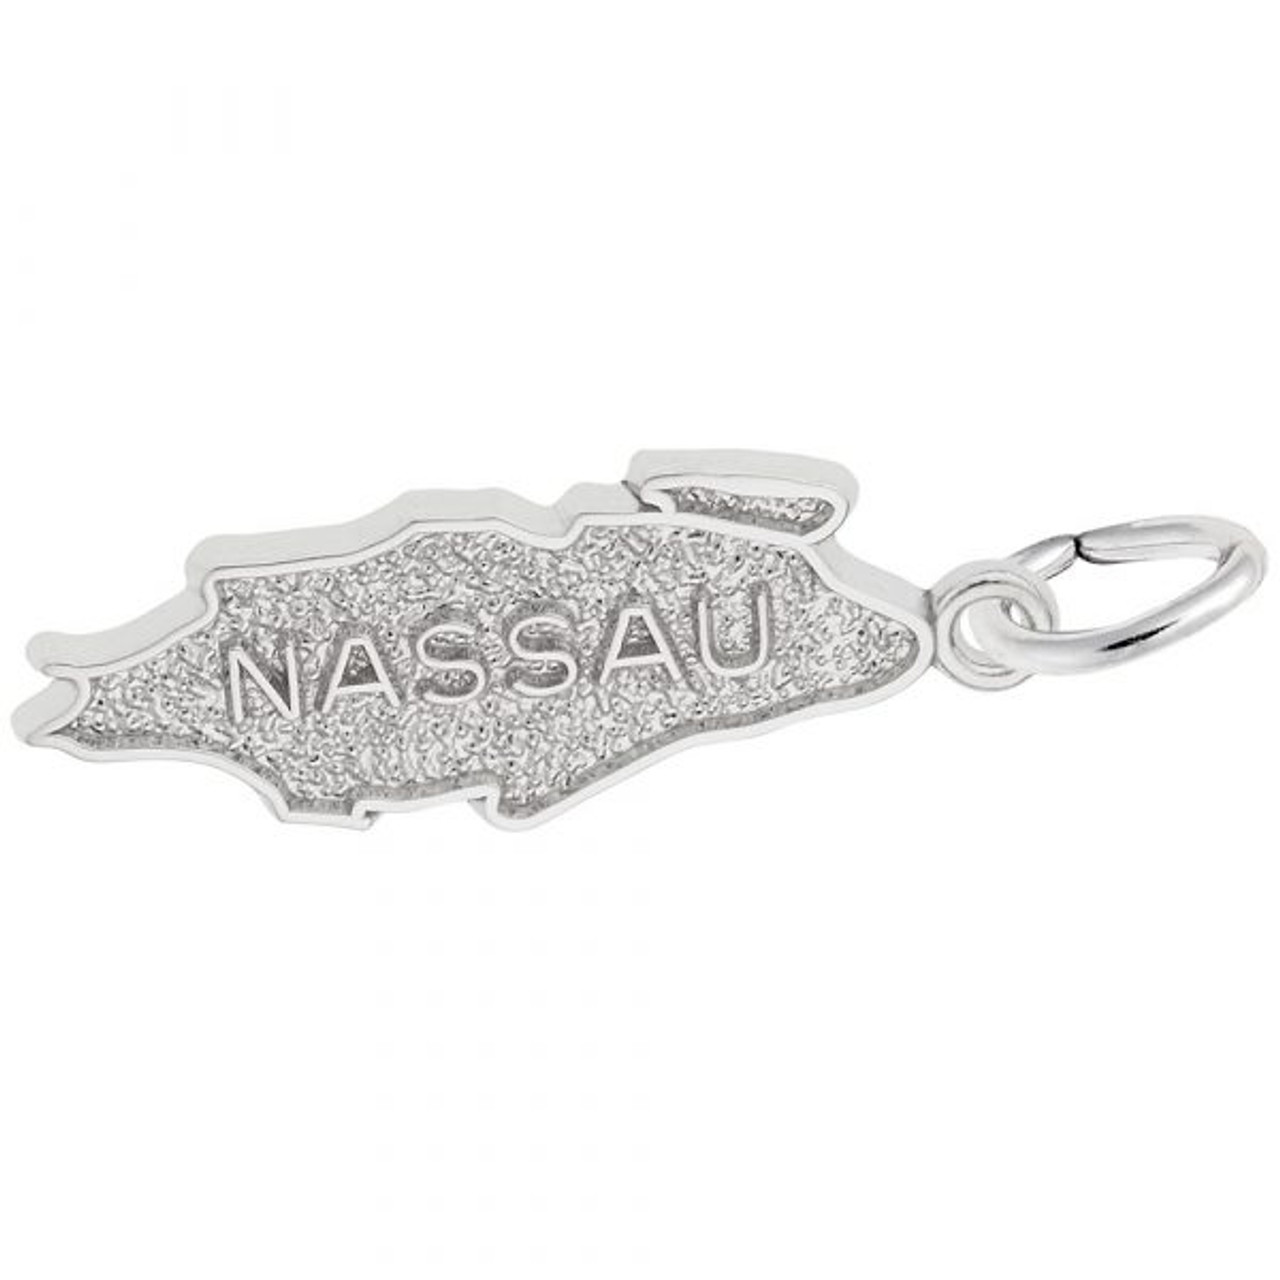 Nassau Map Silver Charm - Sterling Silver and 14k White Gold